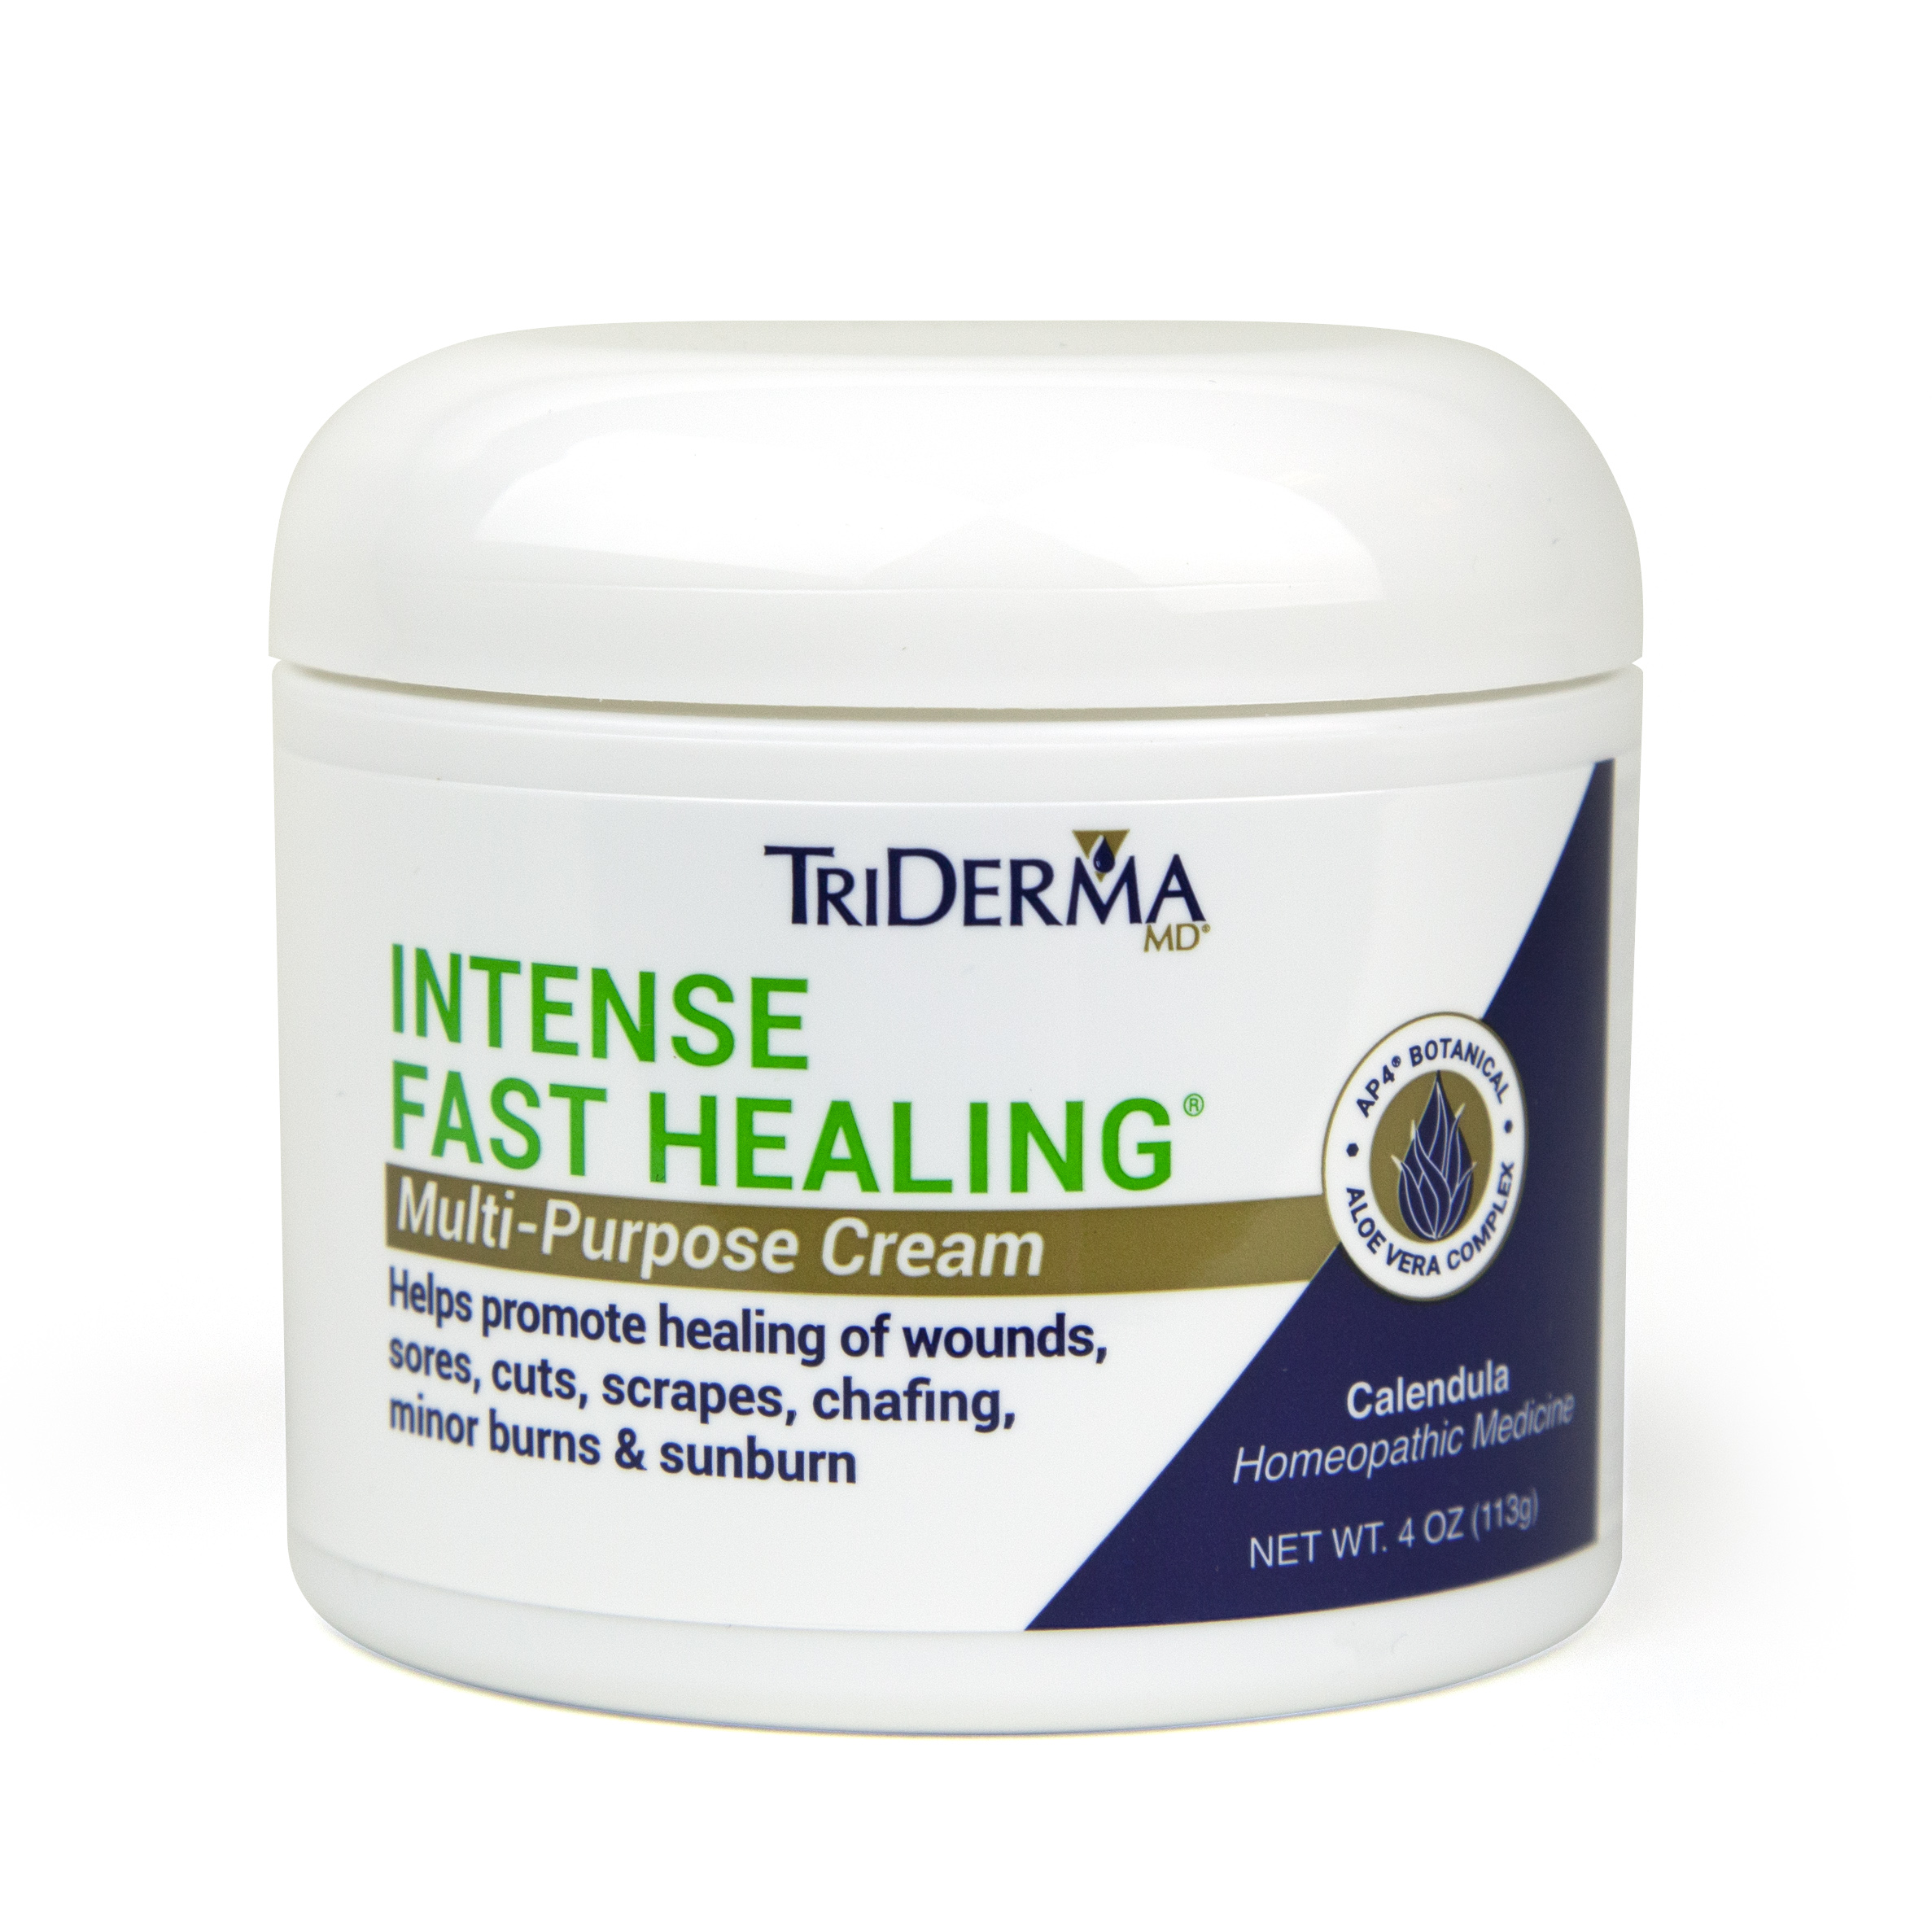 TriDerma Intense Fast Skin Healing Cream for Hard-to-Heal Skin Irritations, Sores, Rashes, Dry, Cracked Hands, Cuts, Chafing, Burns - First Aid Kit Essential - FSA Eligible 4oz Jar - image 1 of 9